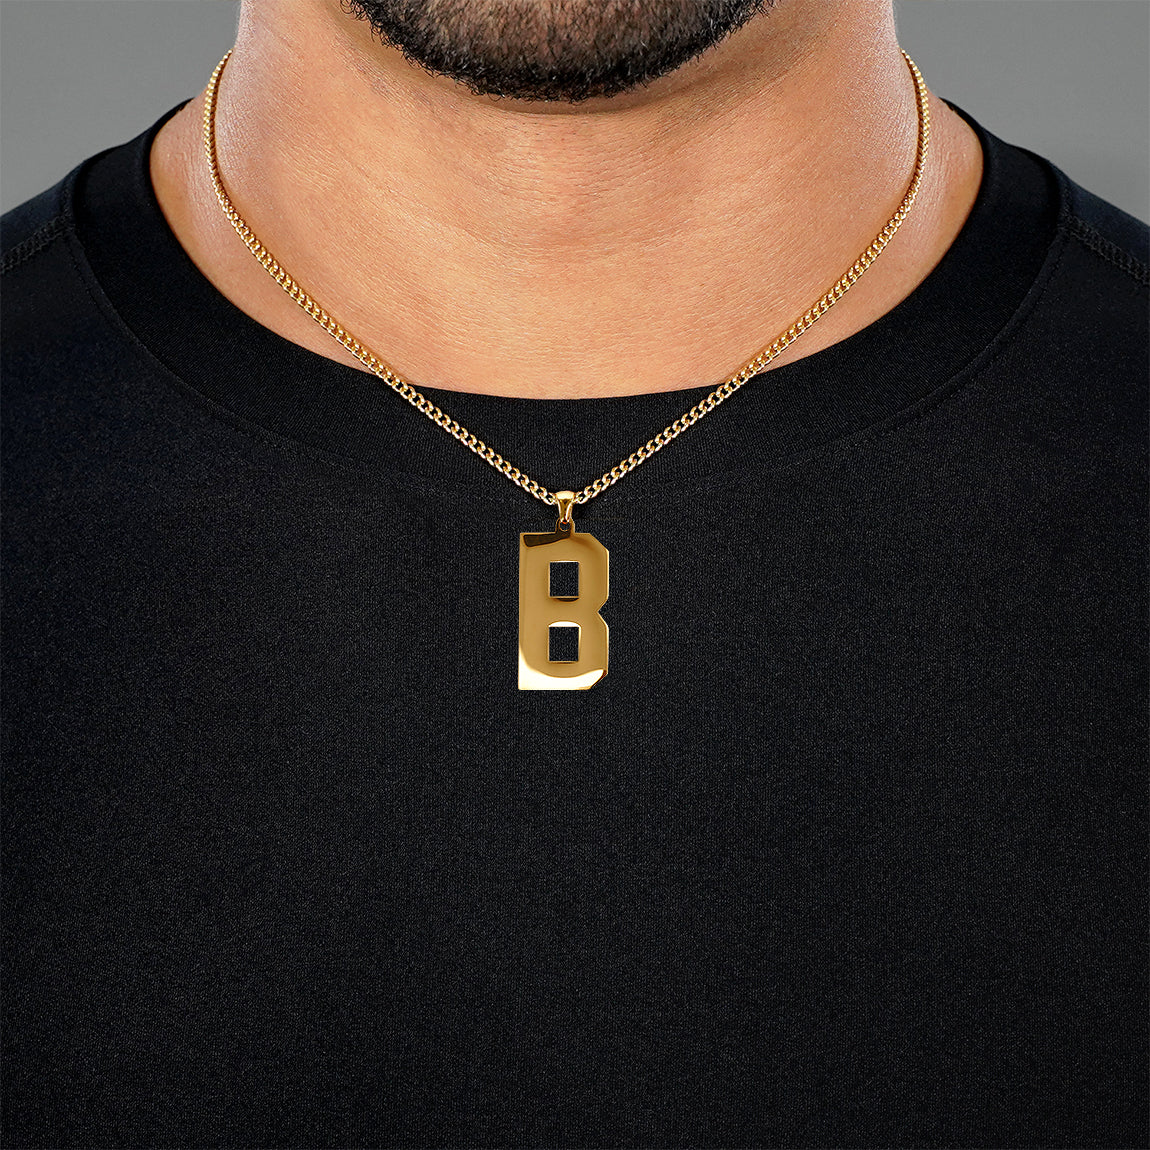 B Letter Pendant with Chain Necklace - Gold Plated Stainless Steel